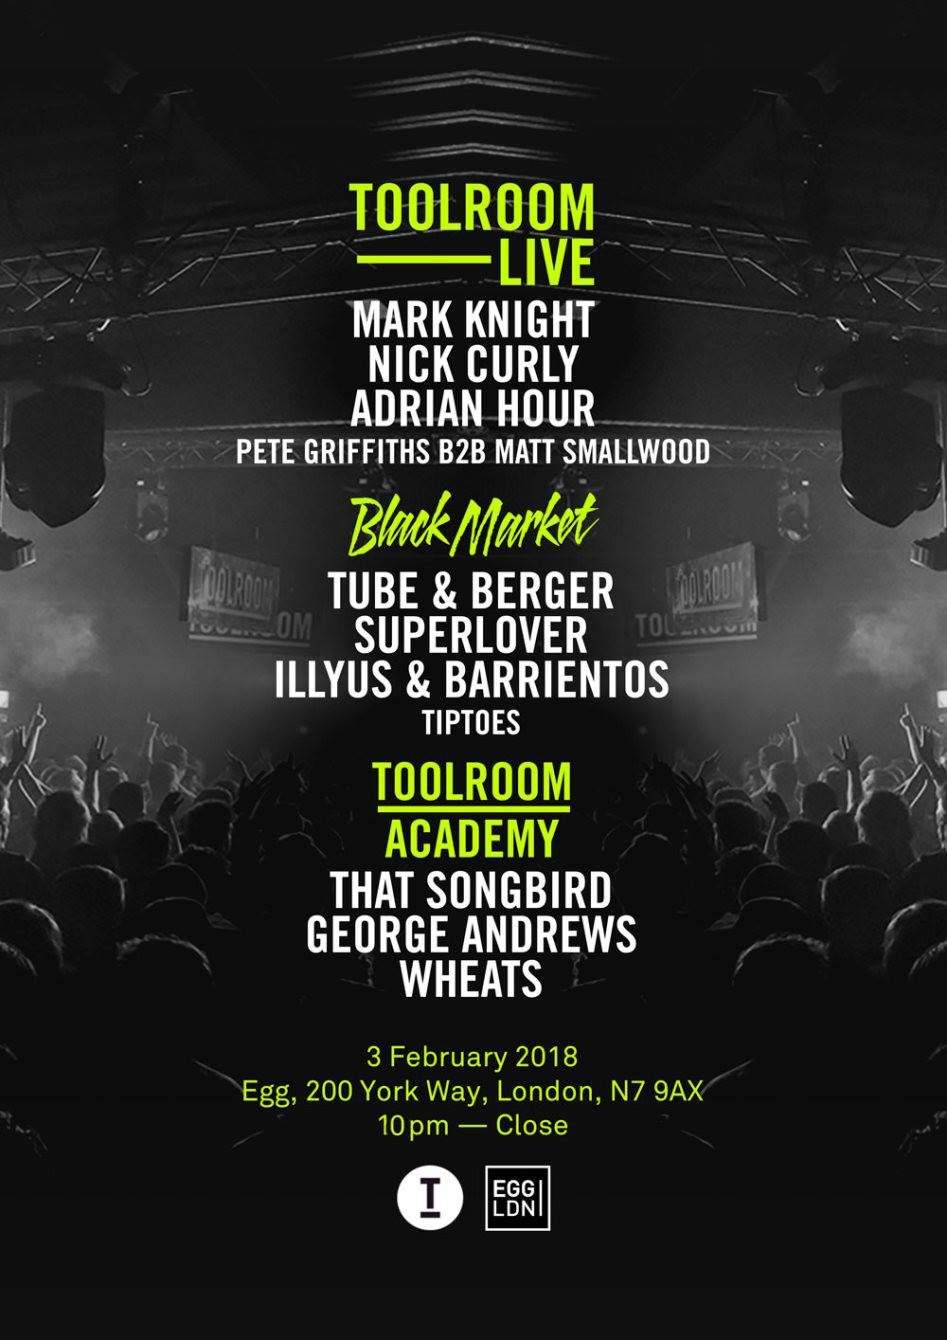 Toolroom Live with Mark Knight, Nick Curly, Adrian Hour, Tube & Berger and More - Página frontal